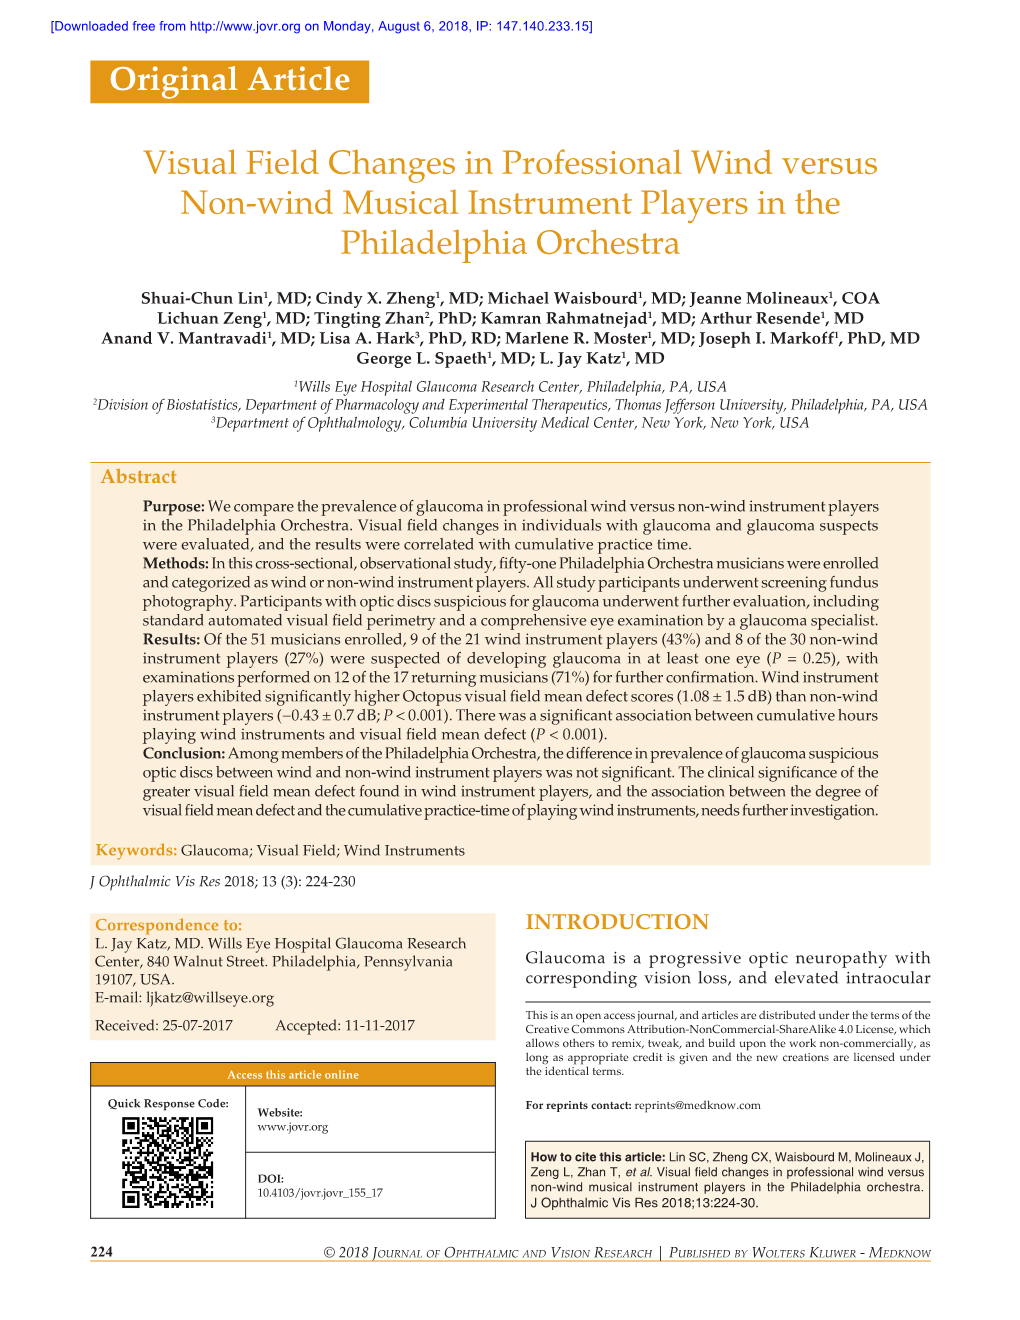 Visual Field Changes in Professional Wind Versus Non‑Wind Musical Instrument Players in the Philadelphia Orchestra